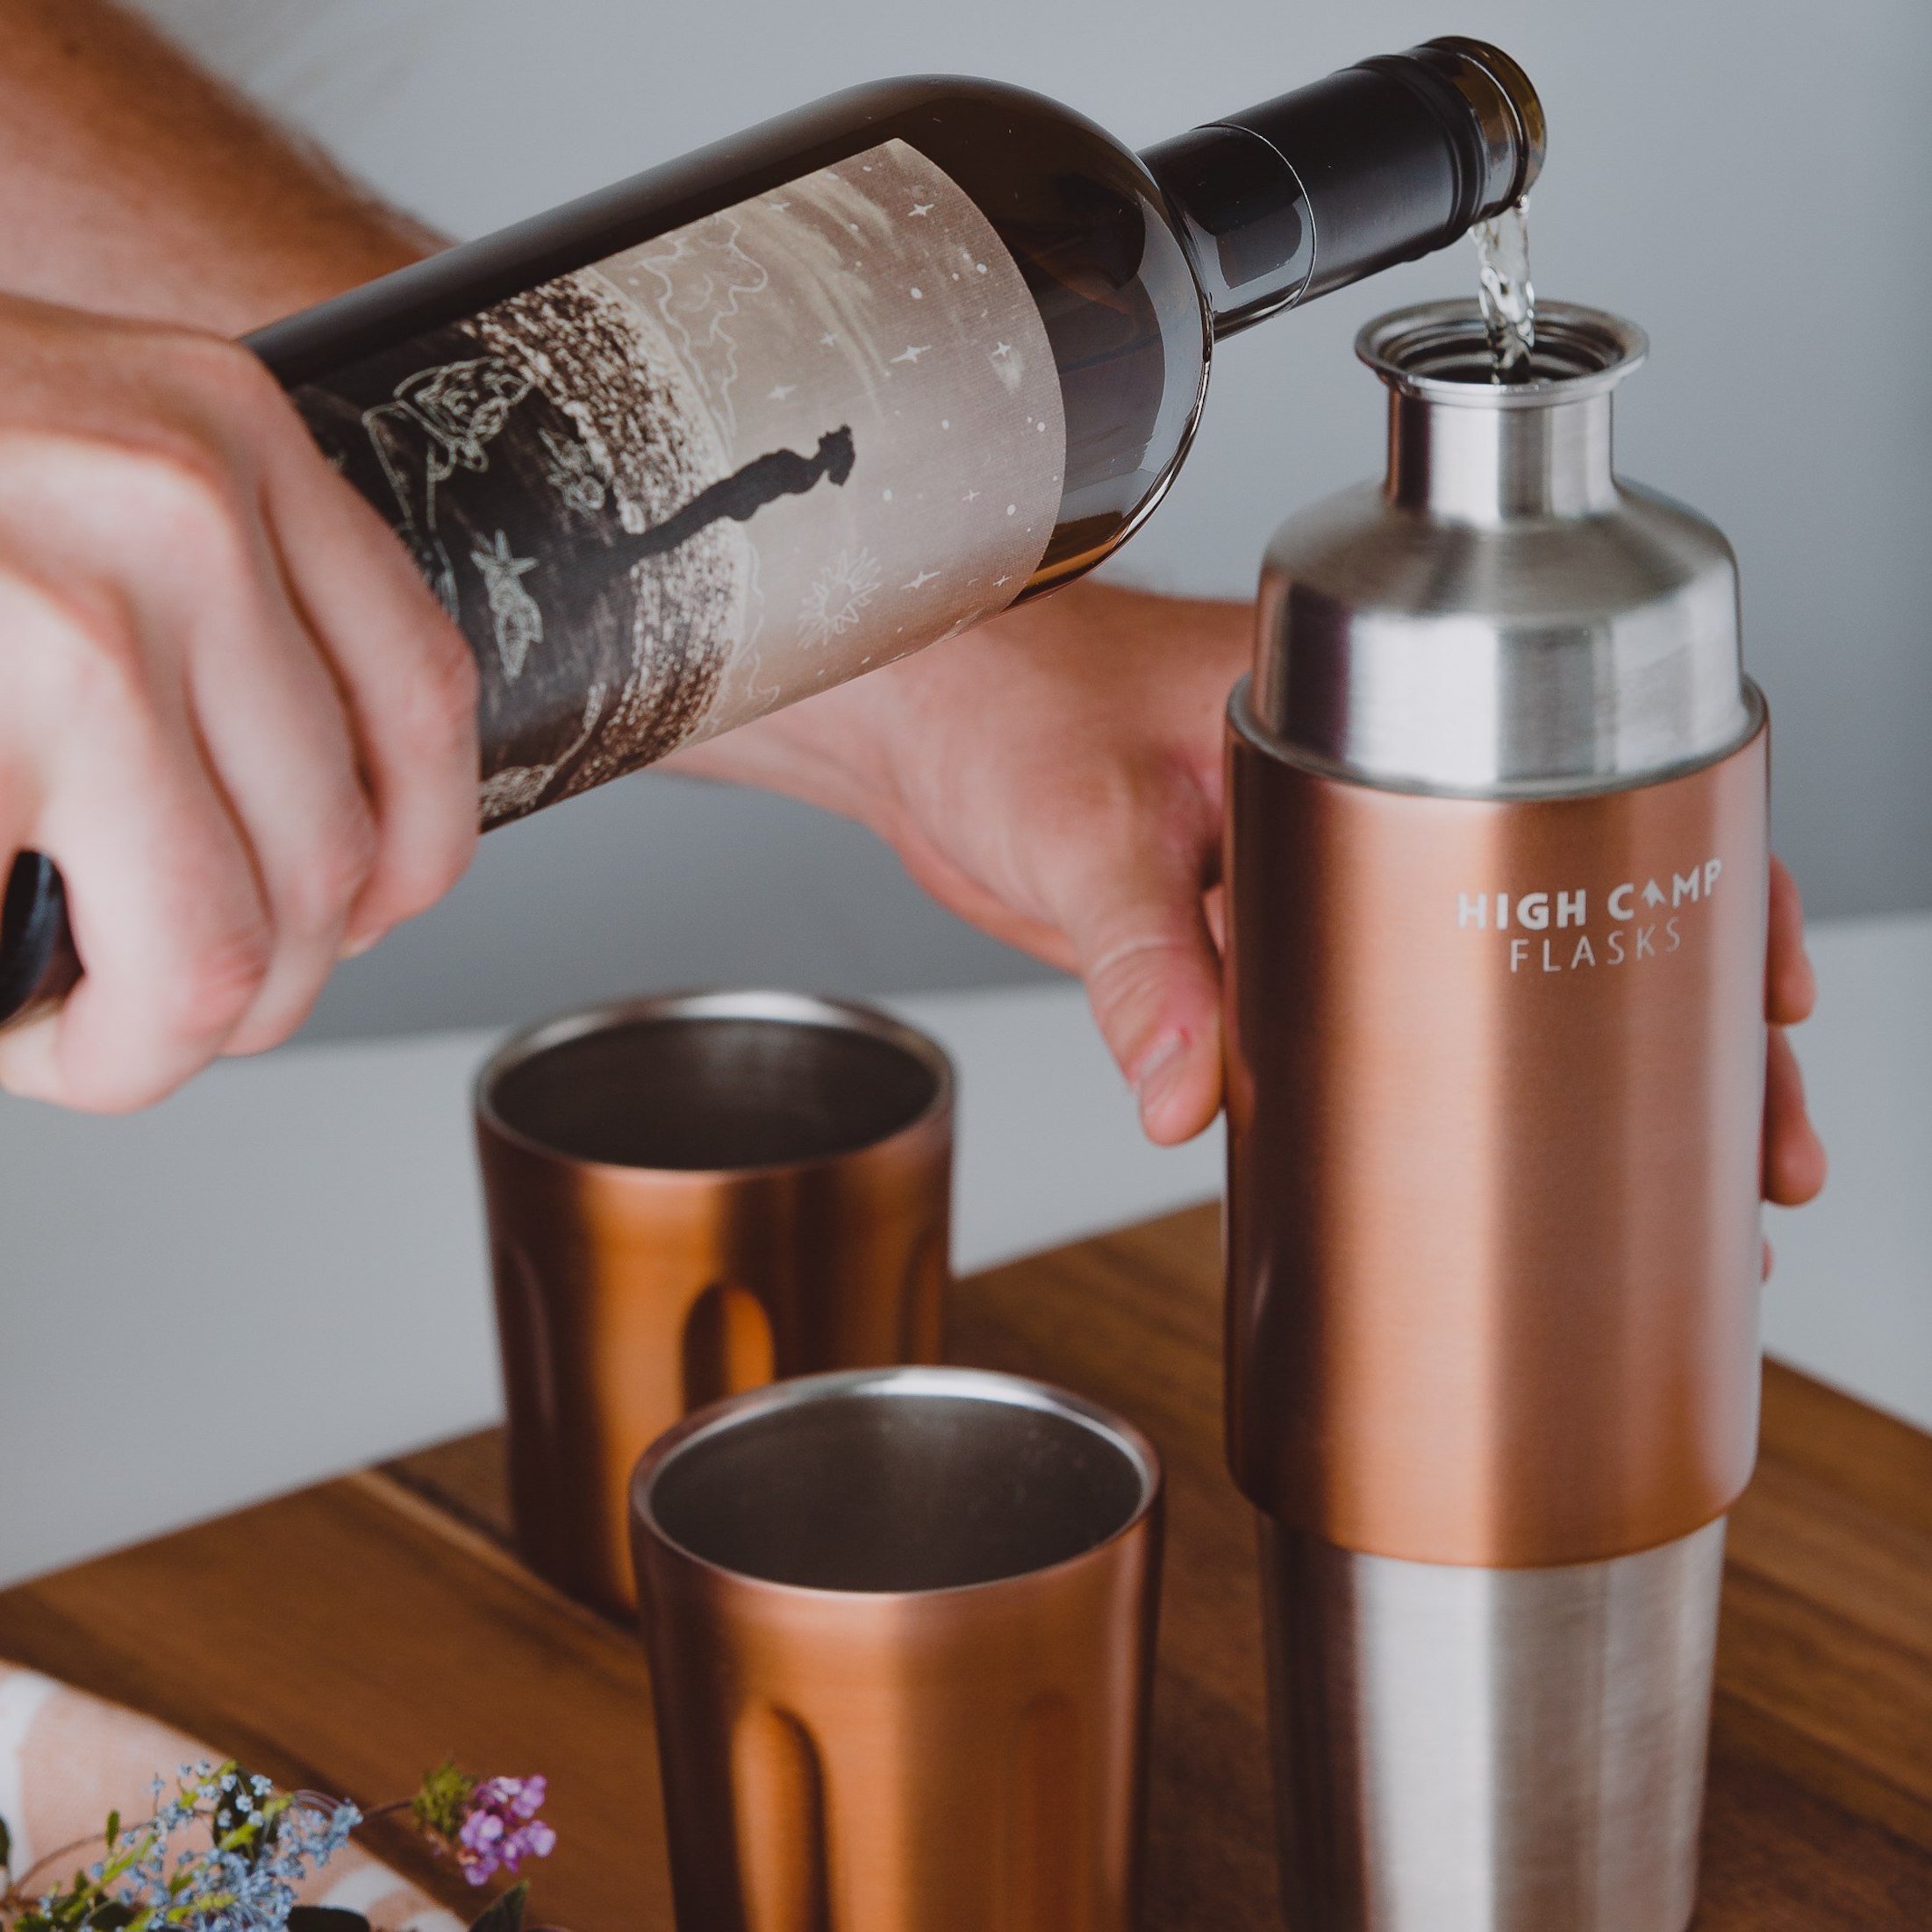 The High Camp Firelight 750 Flask: Designed To Hold A Full Bottle Of ...